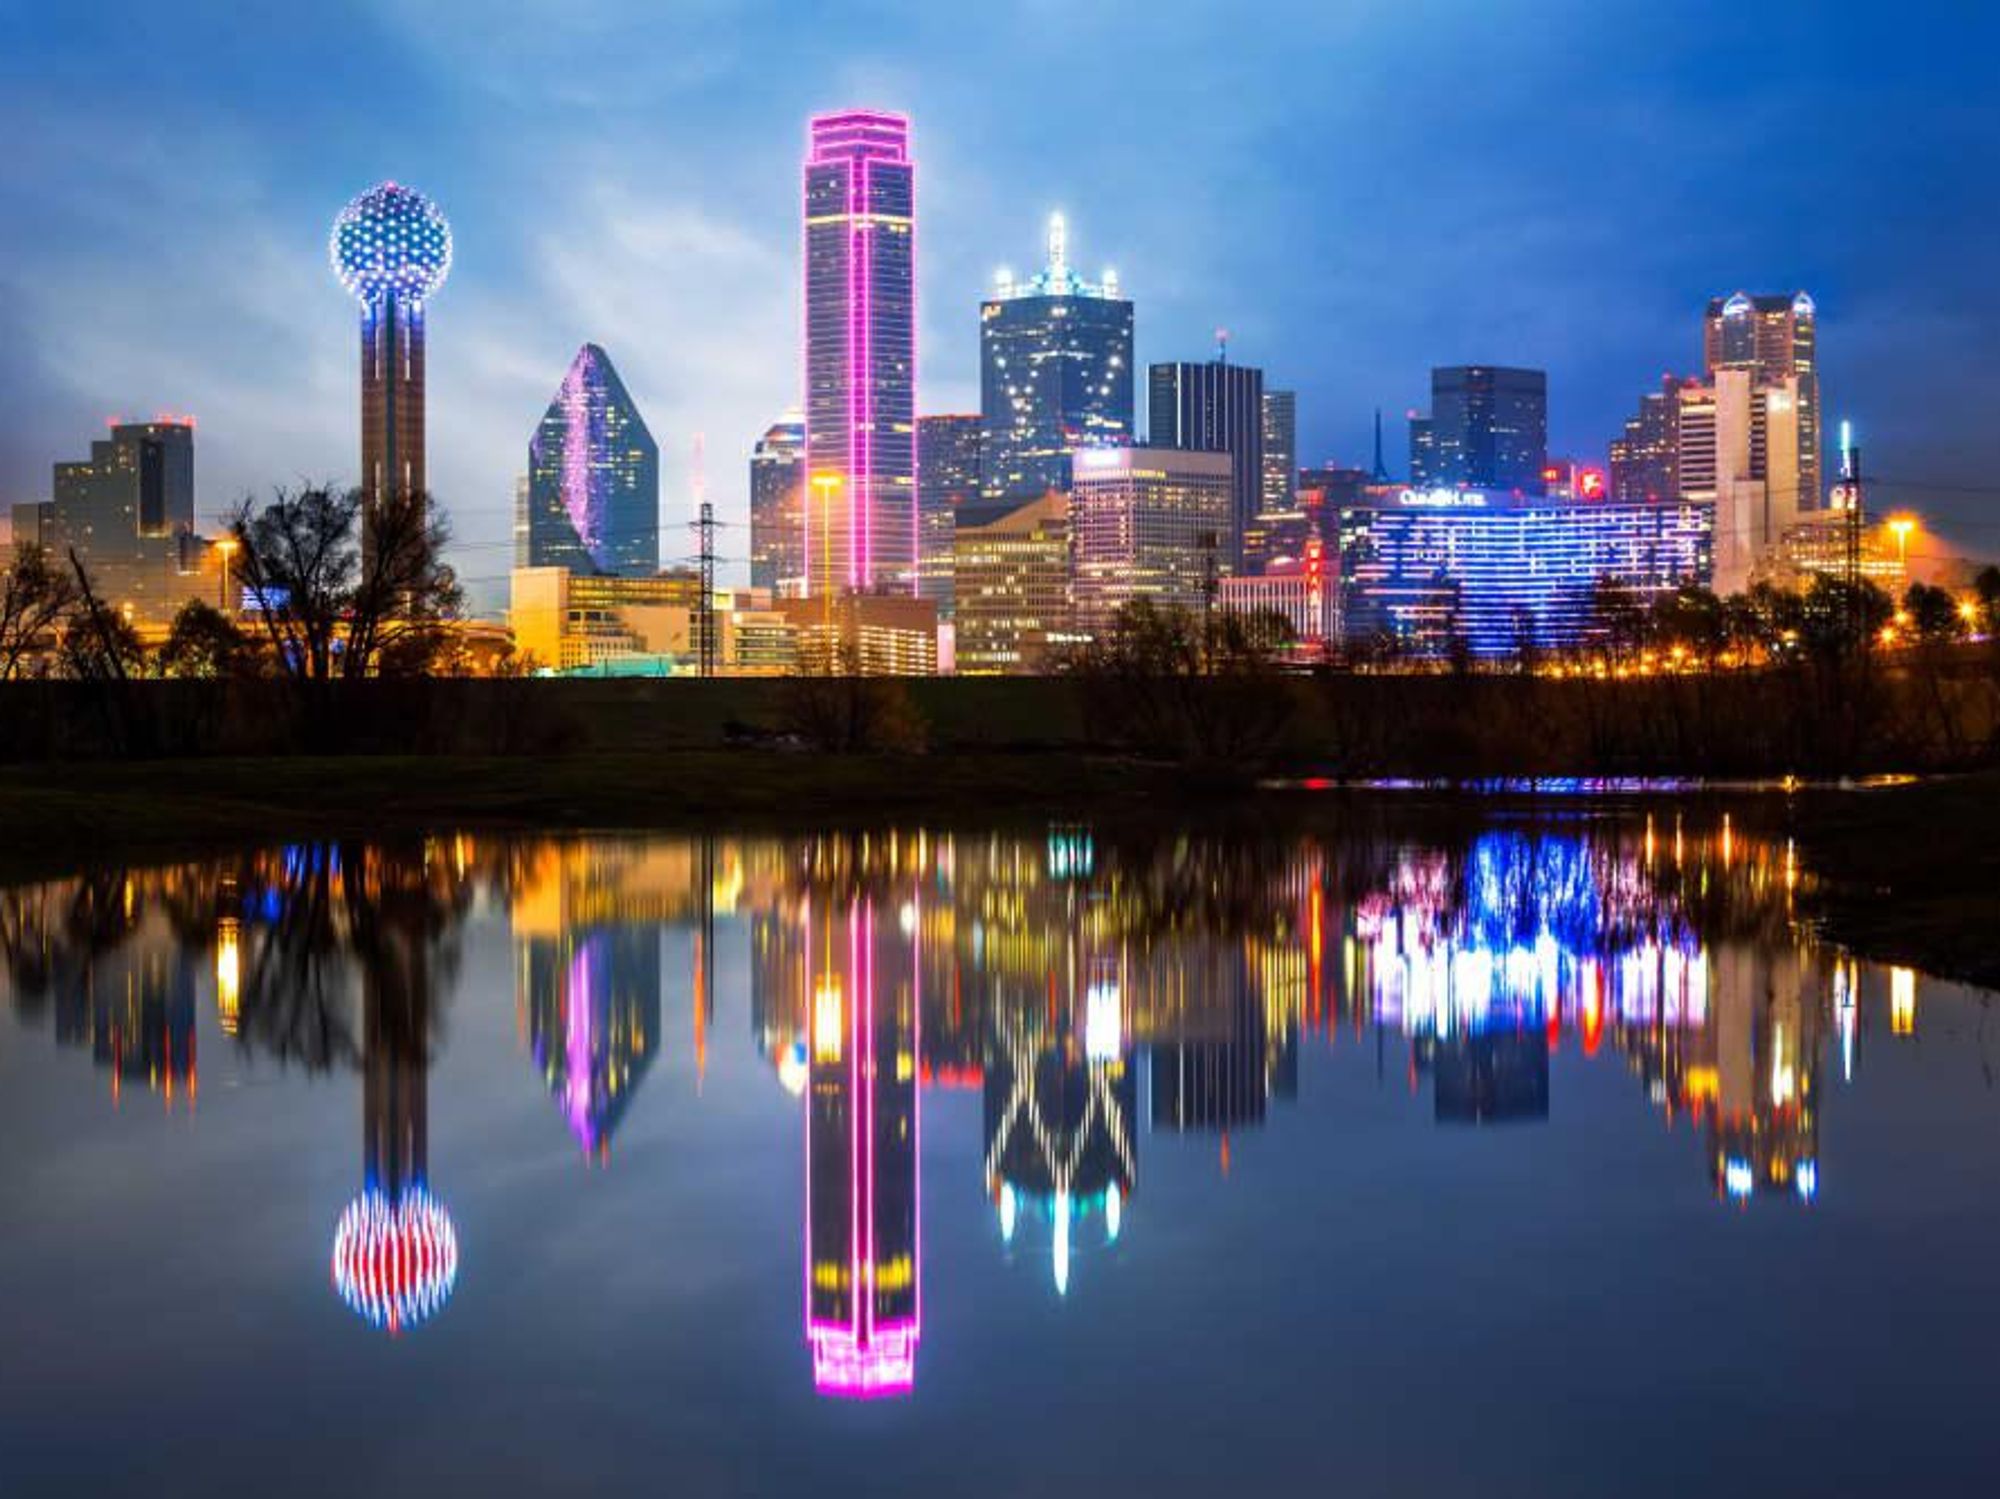 Dallas skyline with reflection